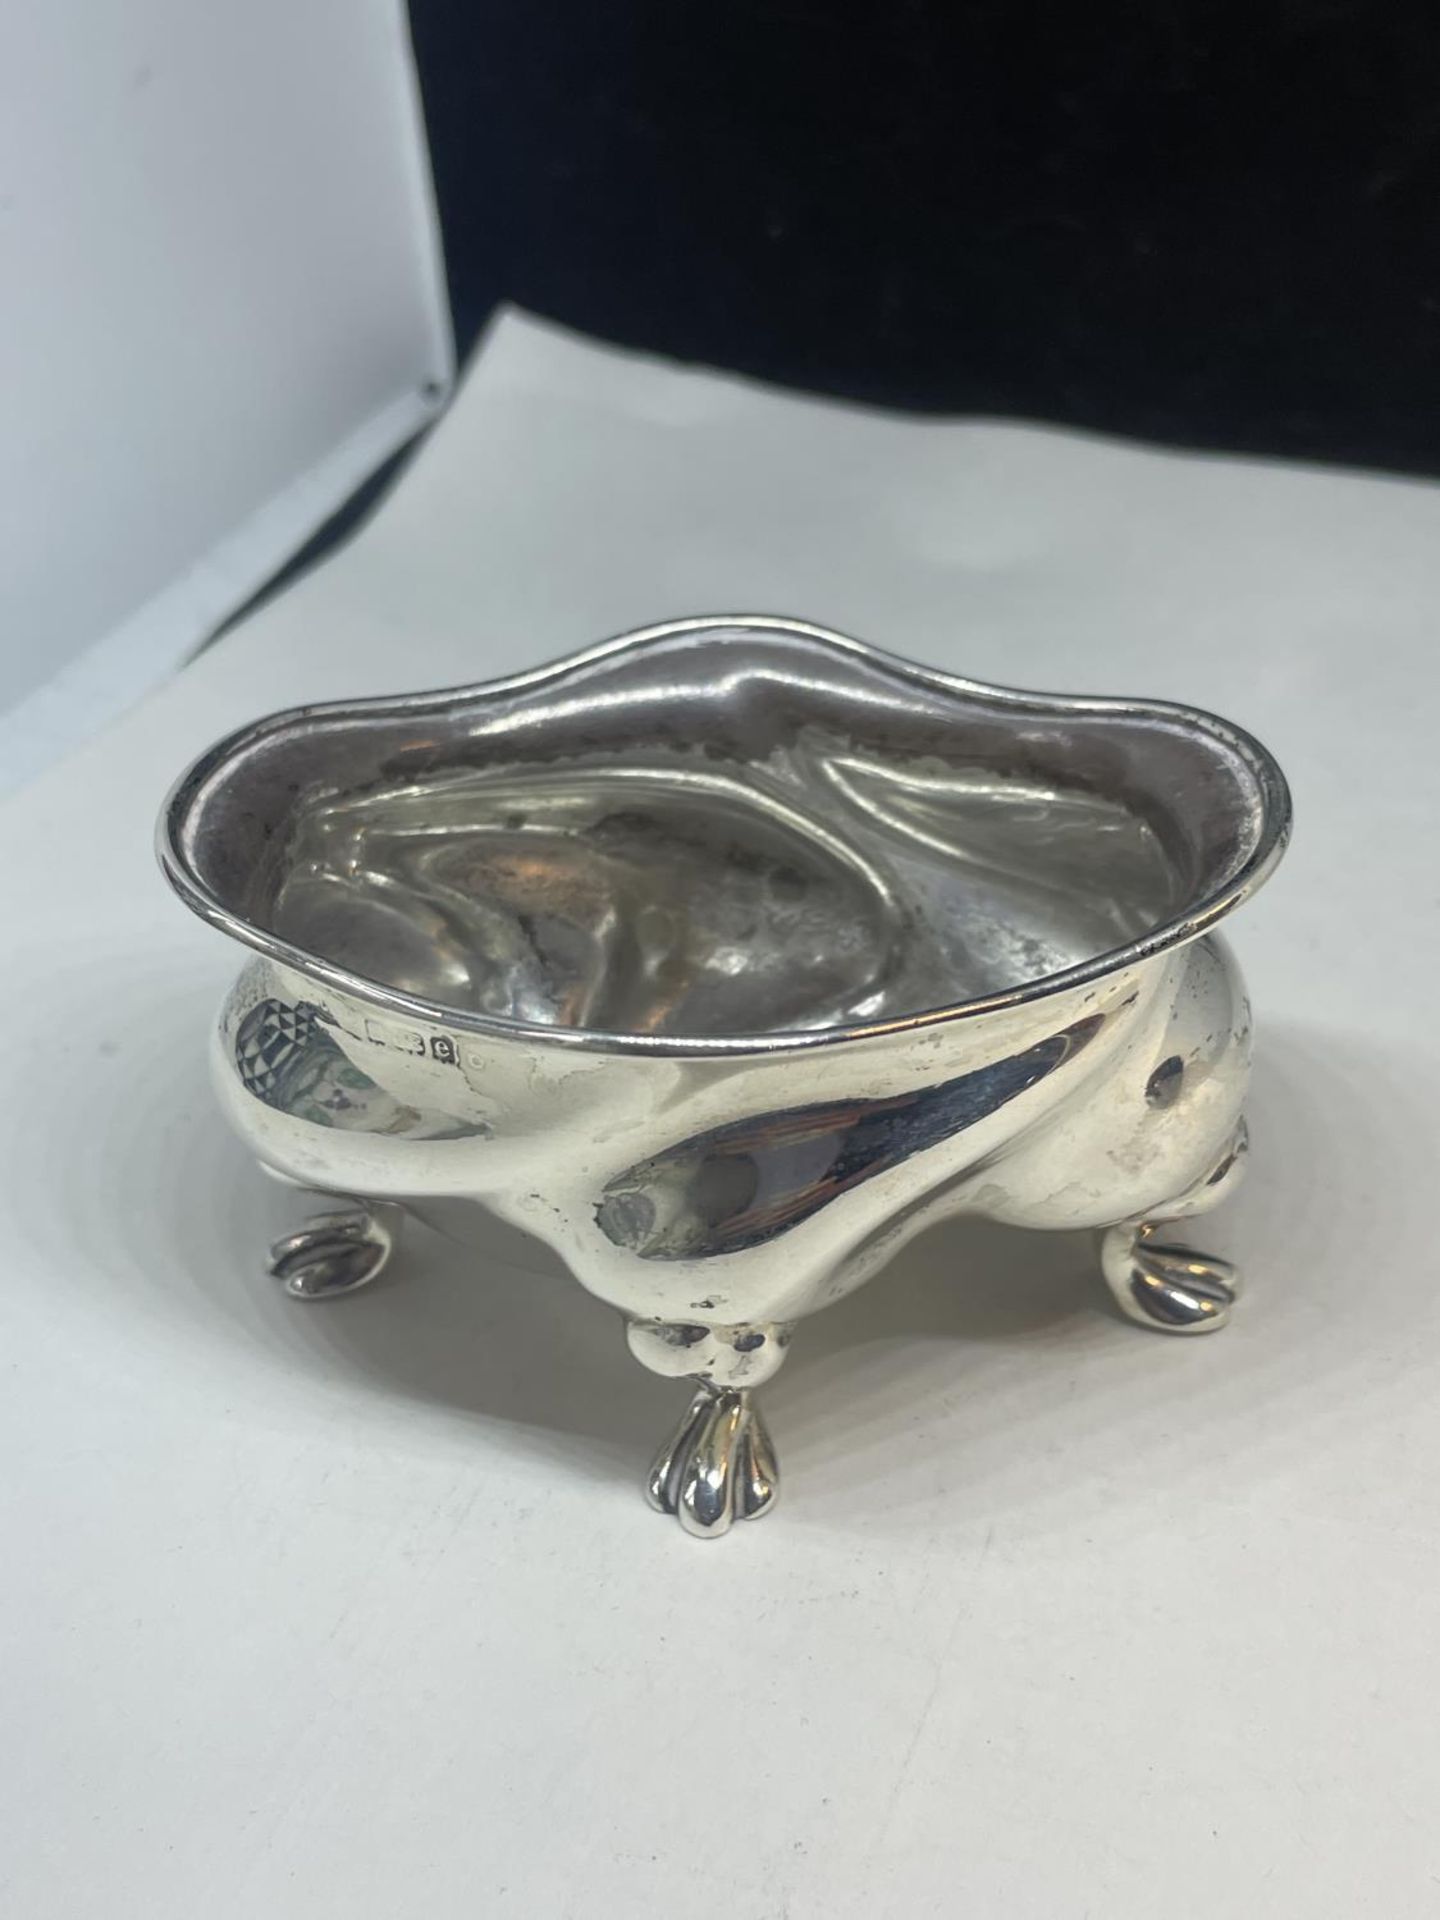 A HALLMARKED BIRMINGHAM SILVER FOOTED OVAL DISH GROSS WEIGHT 77.08 GRAMS - Image 2 of 3